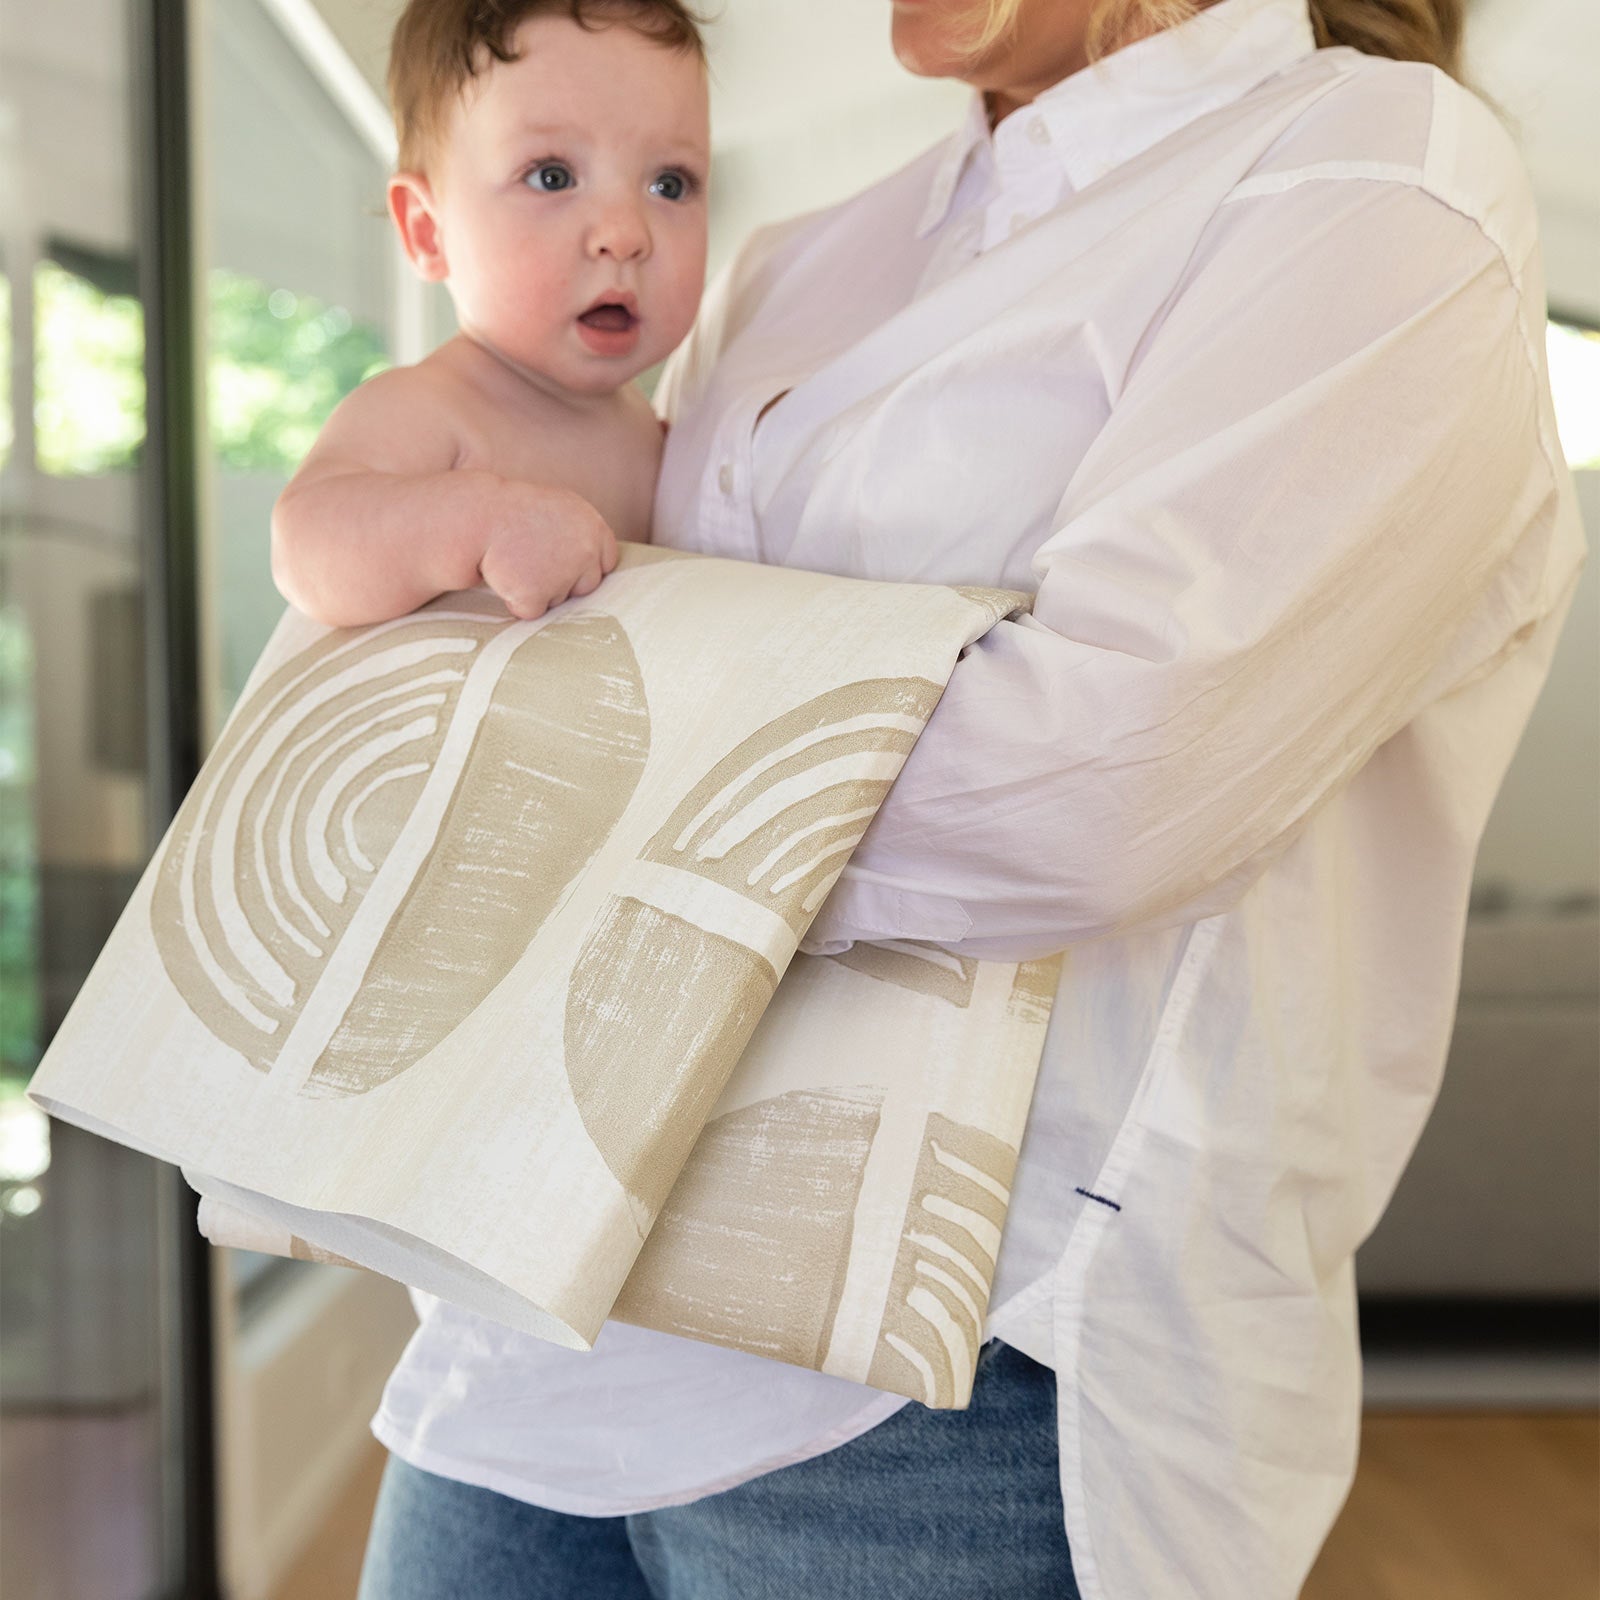 Ada modern minimalist baby high chair mat in Pebble taupe and off white shown folded up being carried with a baby by Mom.